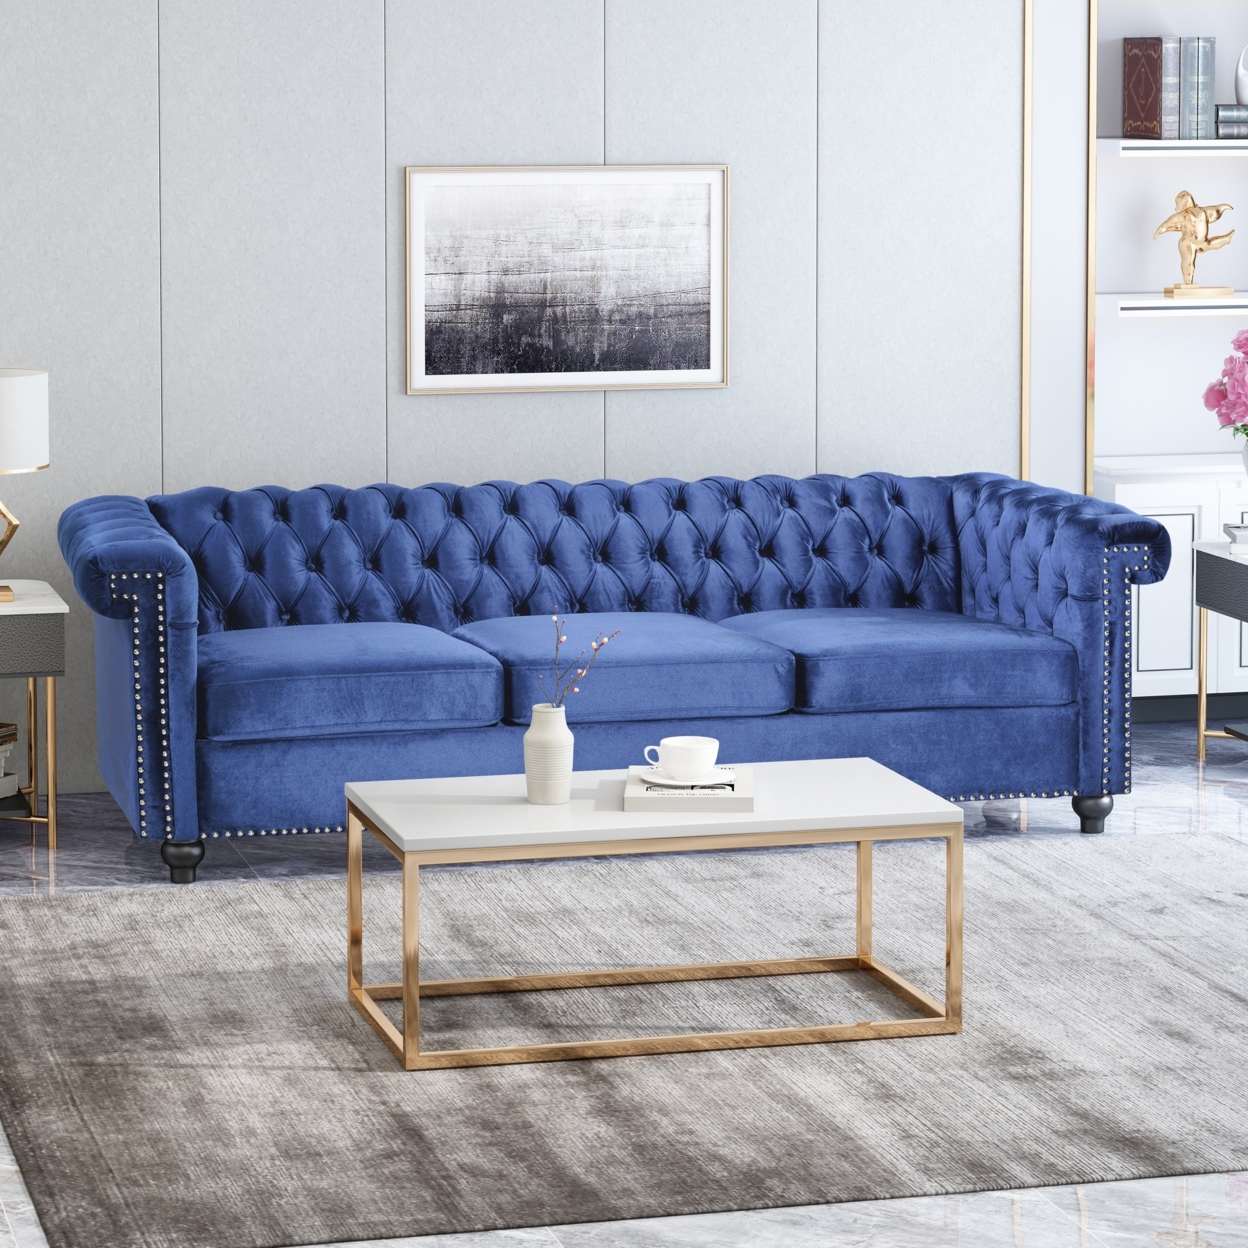 Zyiere Tufted Velvet Chesterfield 3 Seater Sofa - Midnight Blue